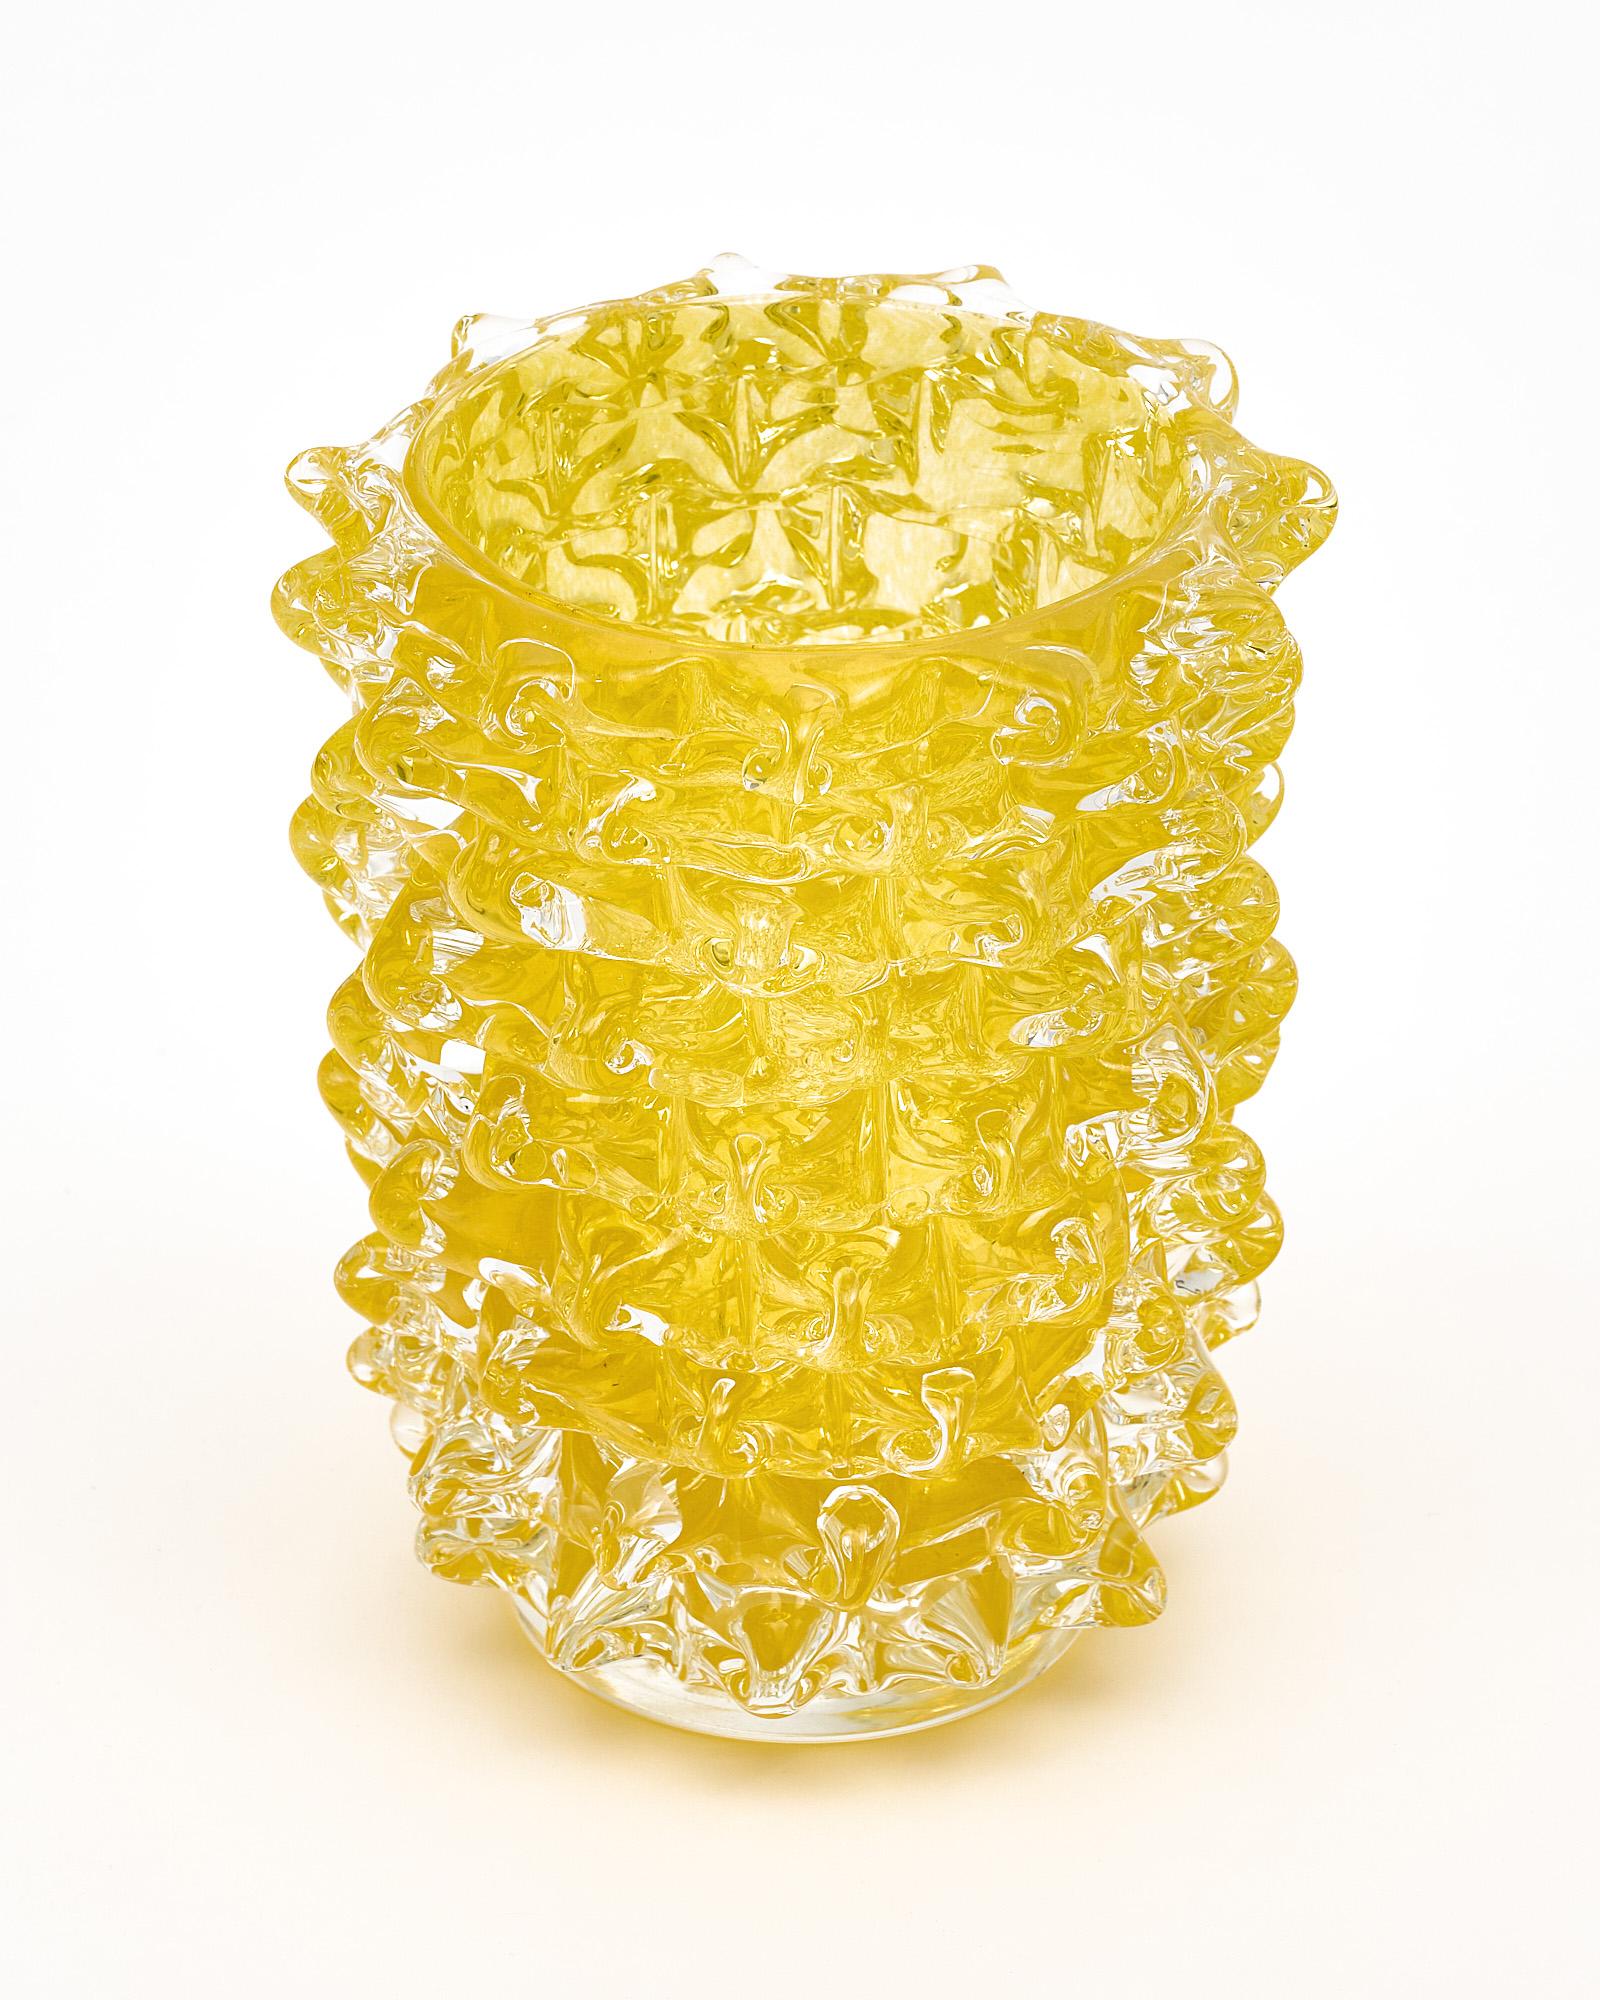 Murano glass vase, Italian, from the island of Murano. This hand-blown piece has a striking yellow color and is made with the rostrate technique.